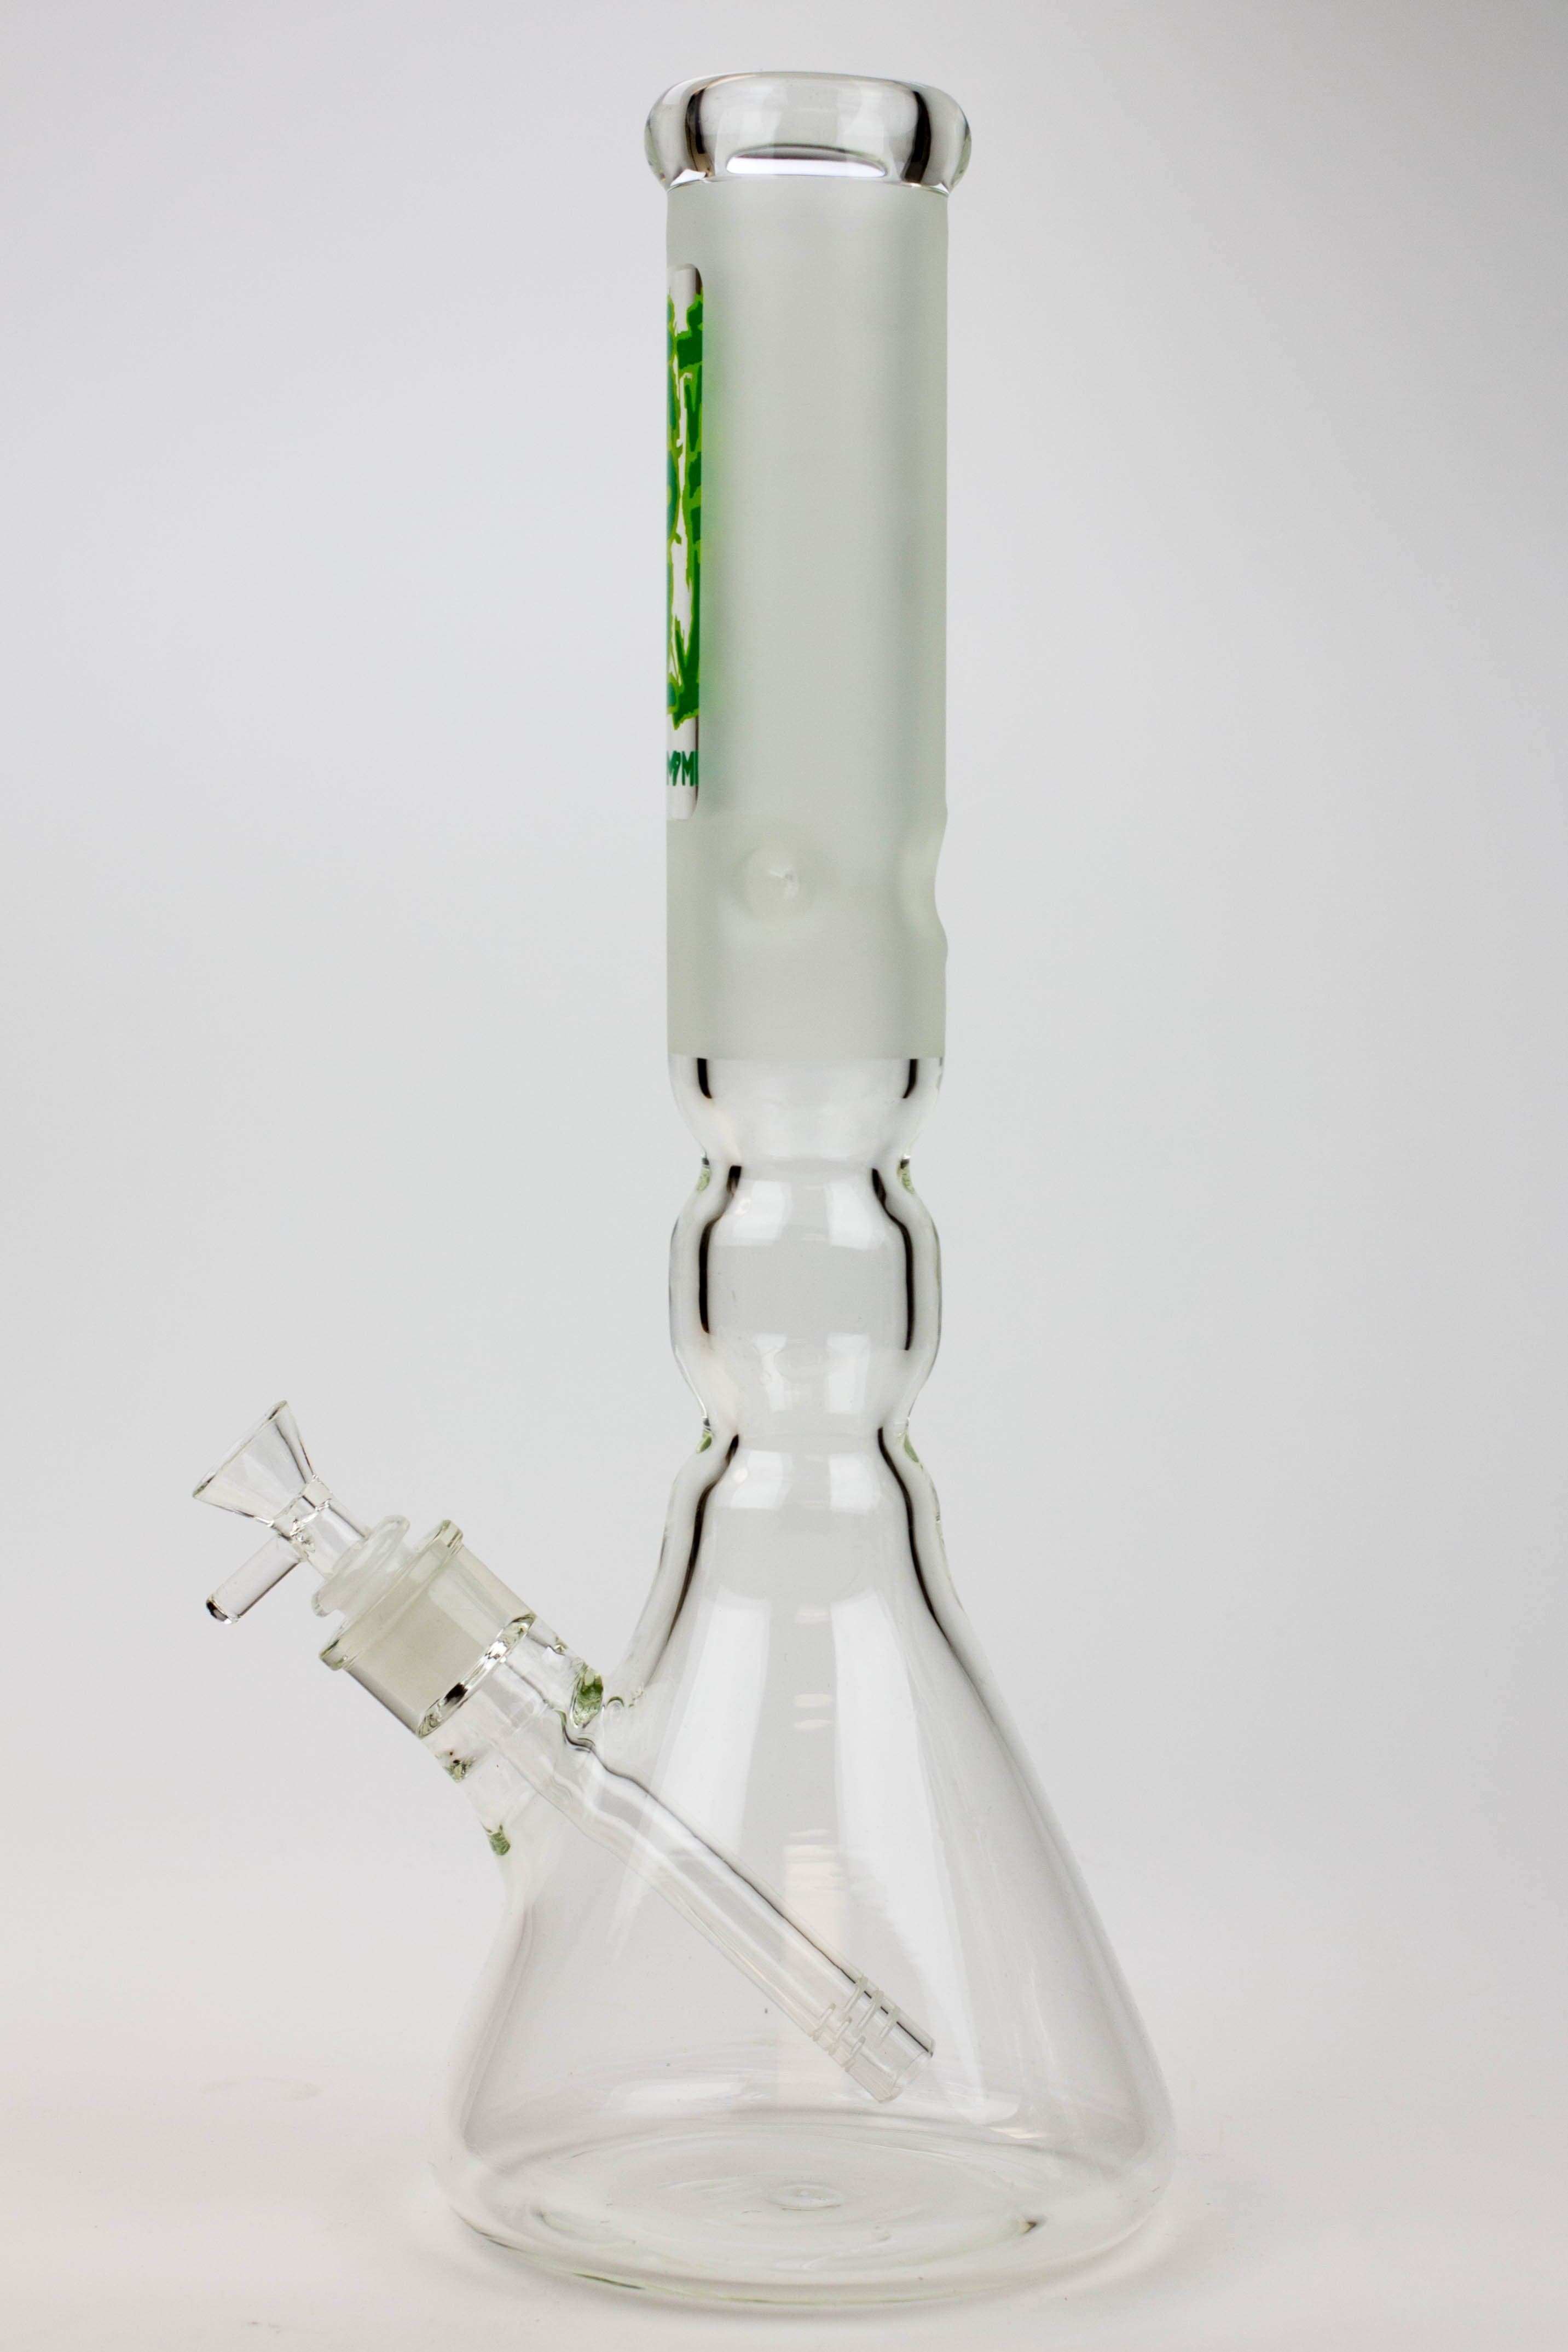 Kush curved tube glass water pipes_8